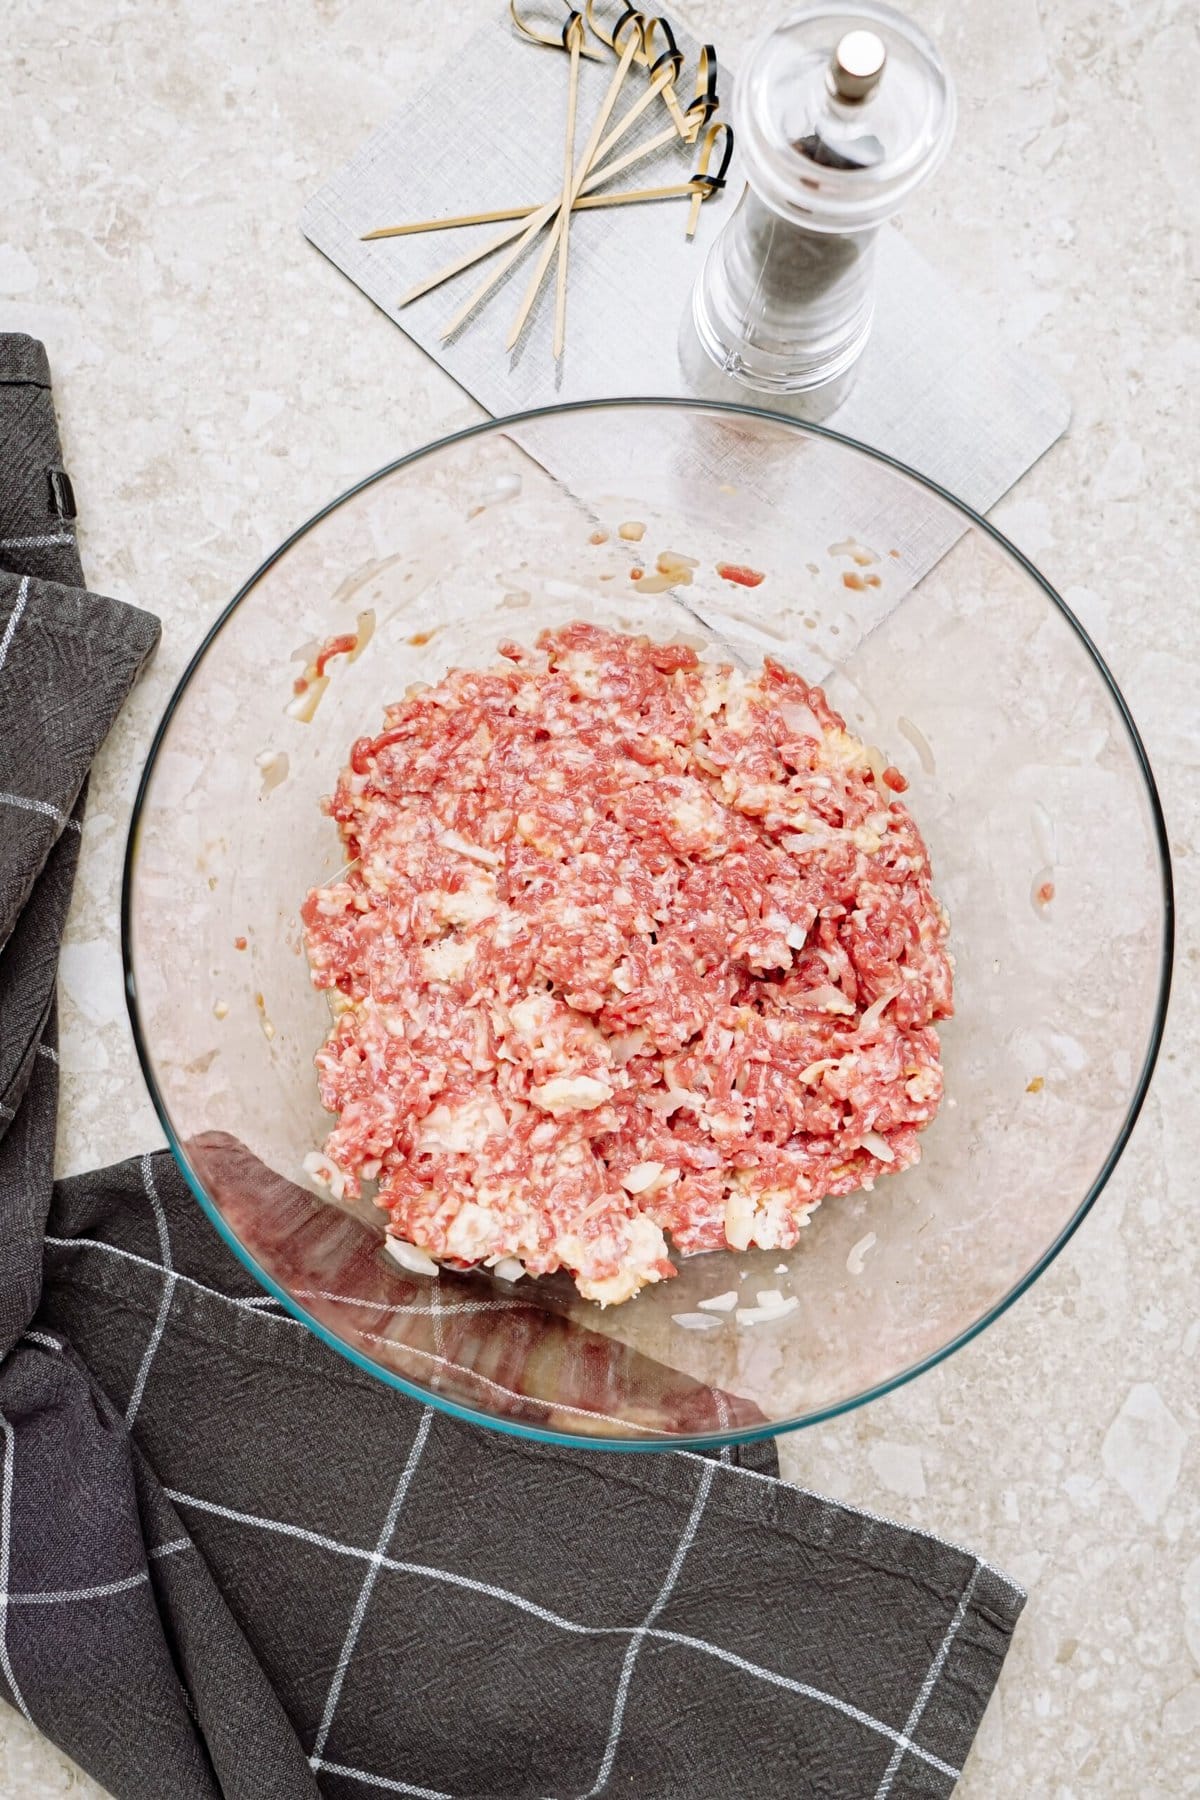 Ground meat mixture in a glass bowl with kitchen utensils and seasoning nearby.